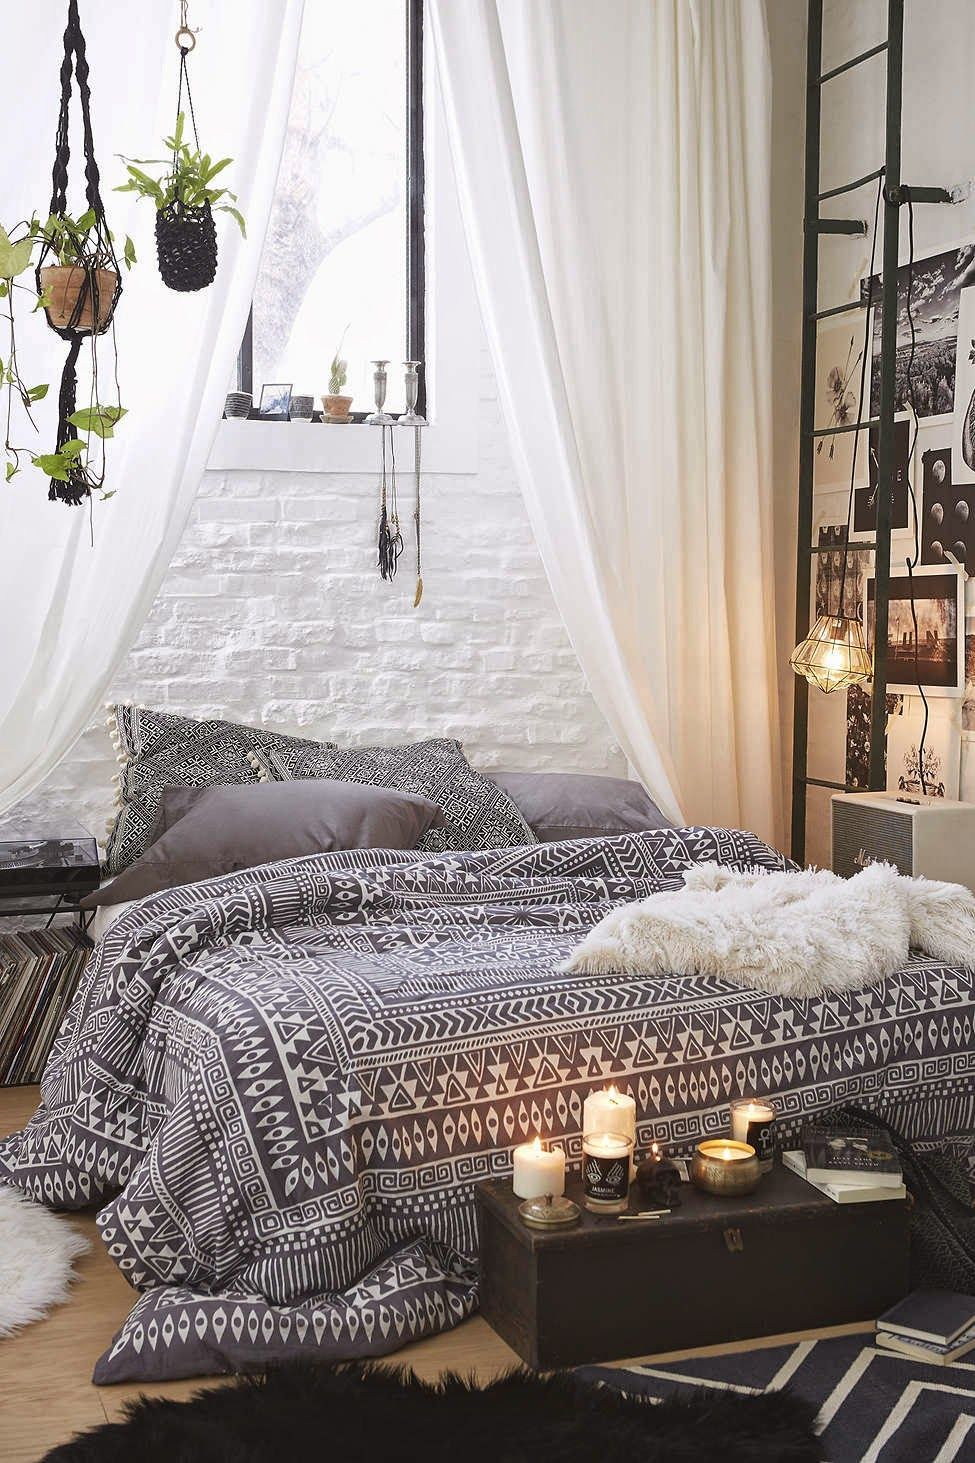 I adore the macrame hanging plants and the curtains, the platform bed and the photo